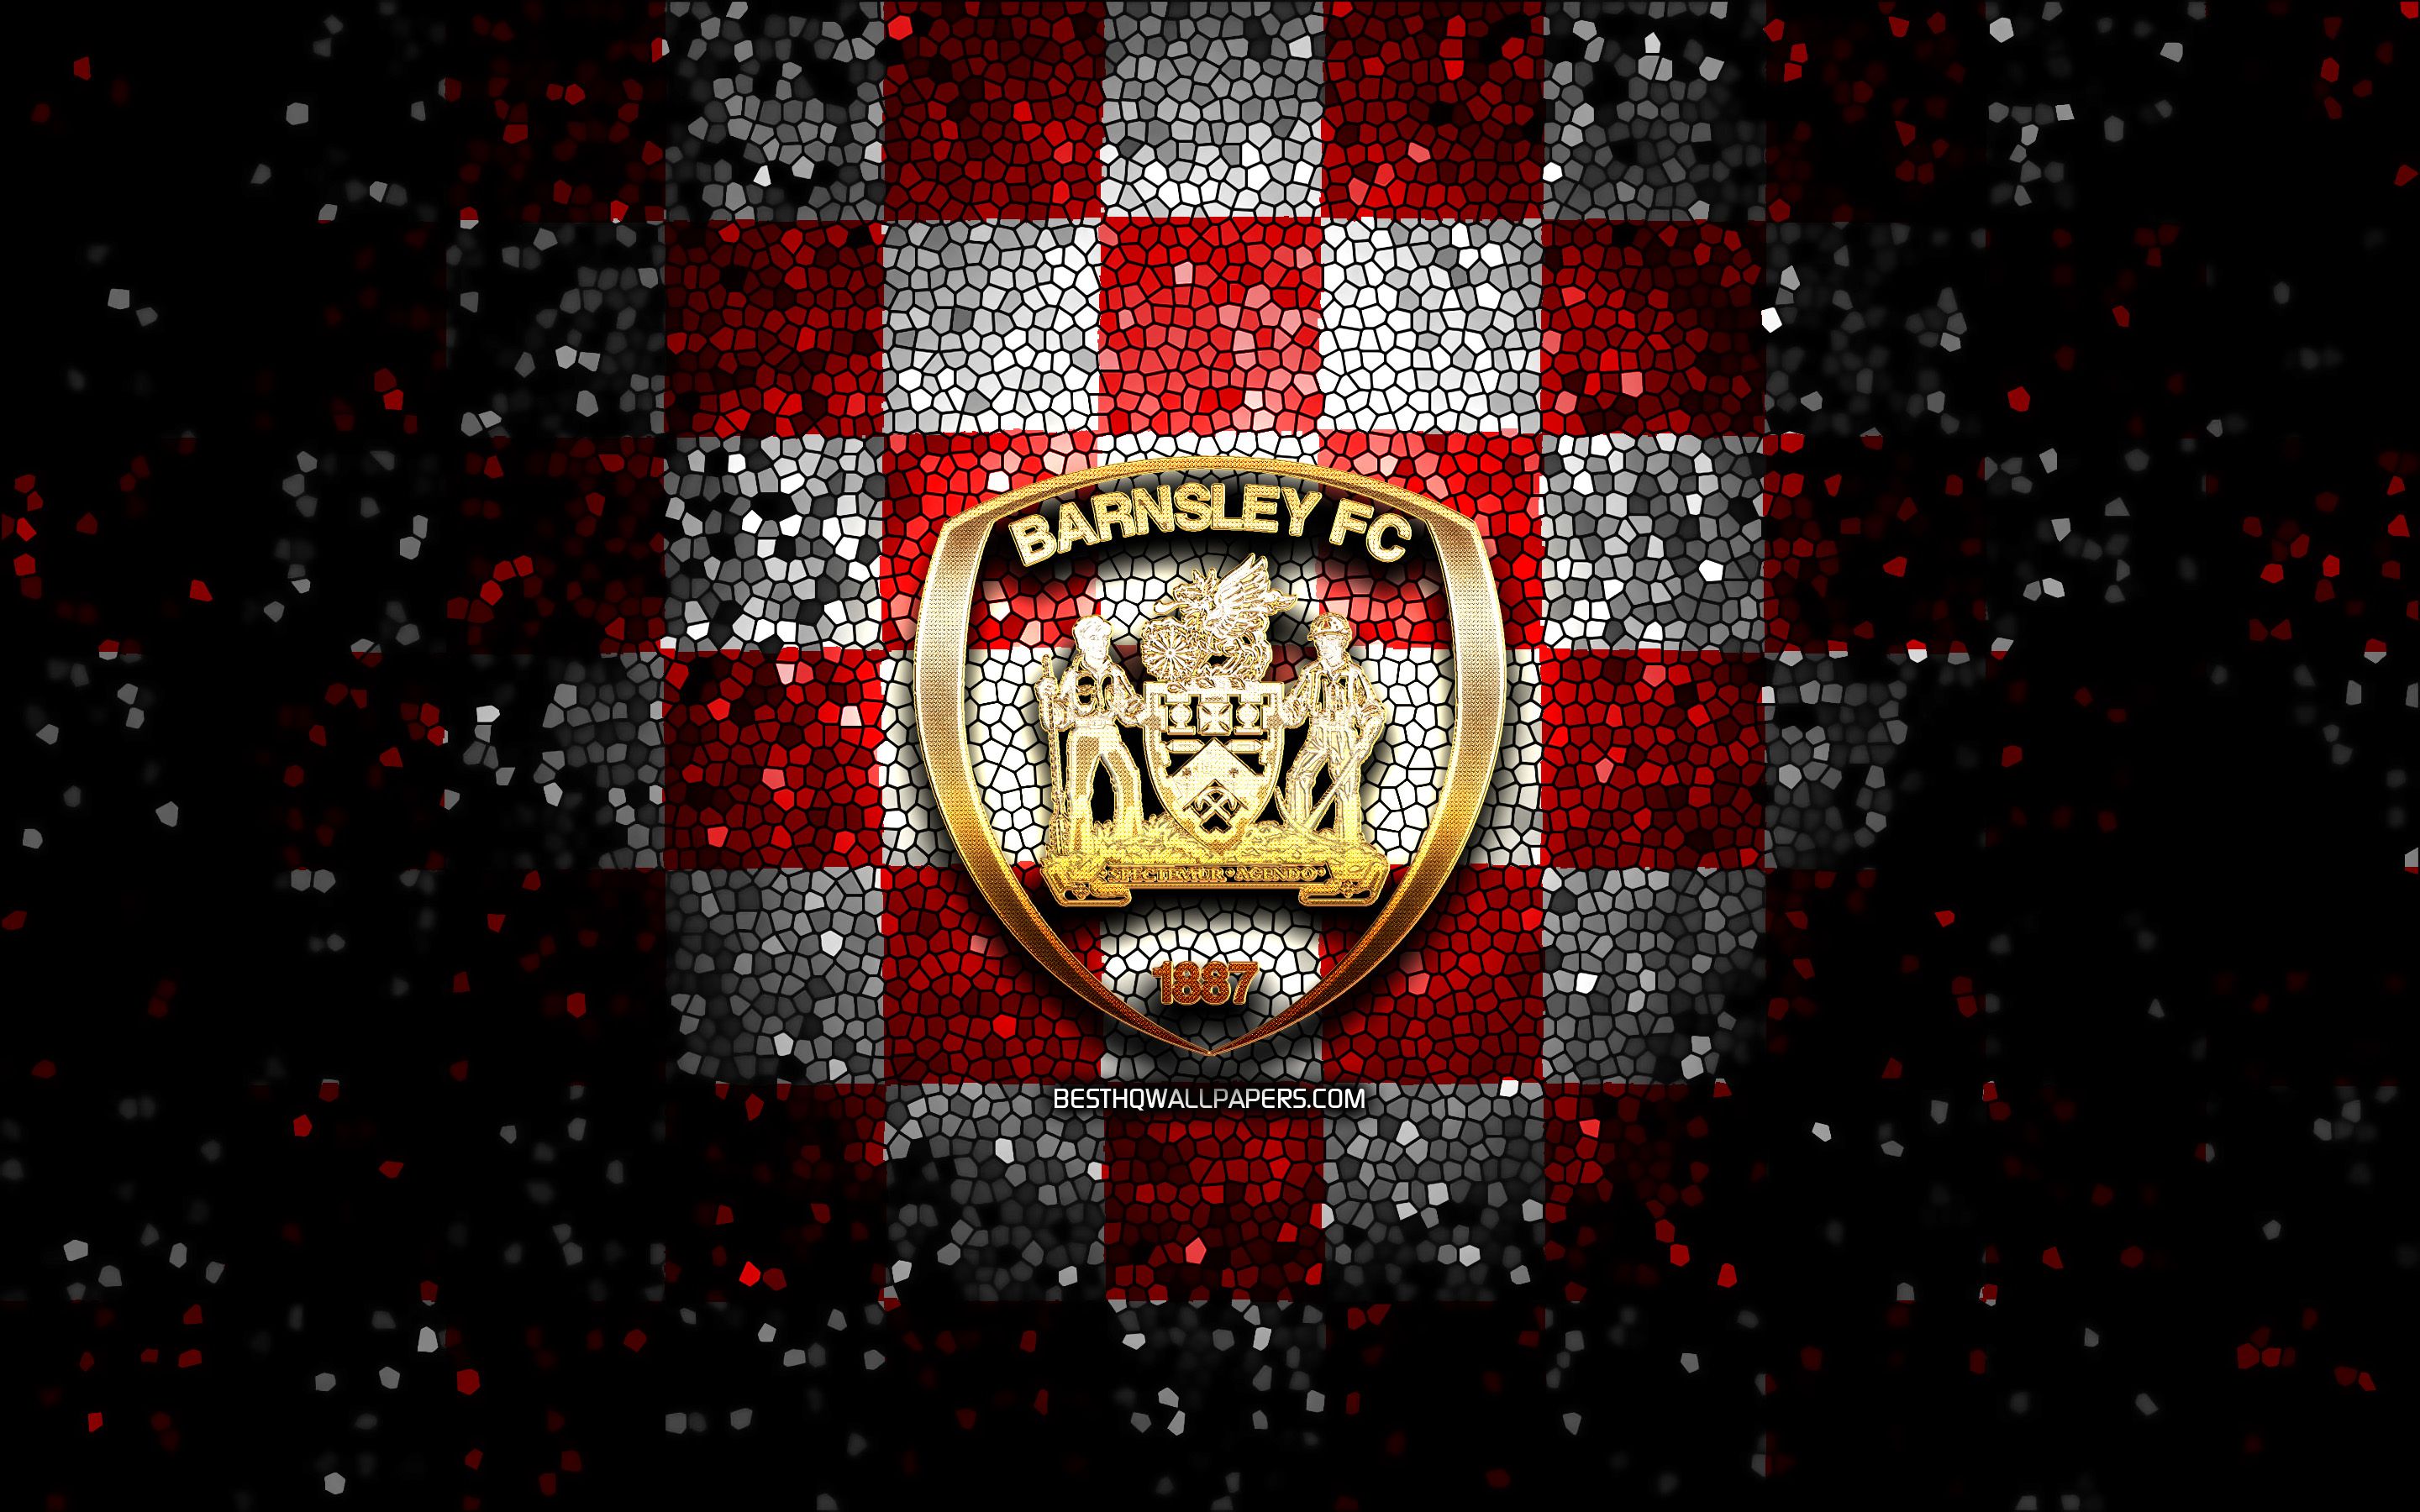 Download wallpaper Barnsley FC, glitter logo, EFL Championship, red white checkered background, soccer, english football club, Barnsley logo, mosaic art, football, FC Barnsley for desktop with resolution 2880x1800. High Quality HD picture